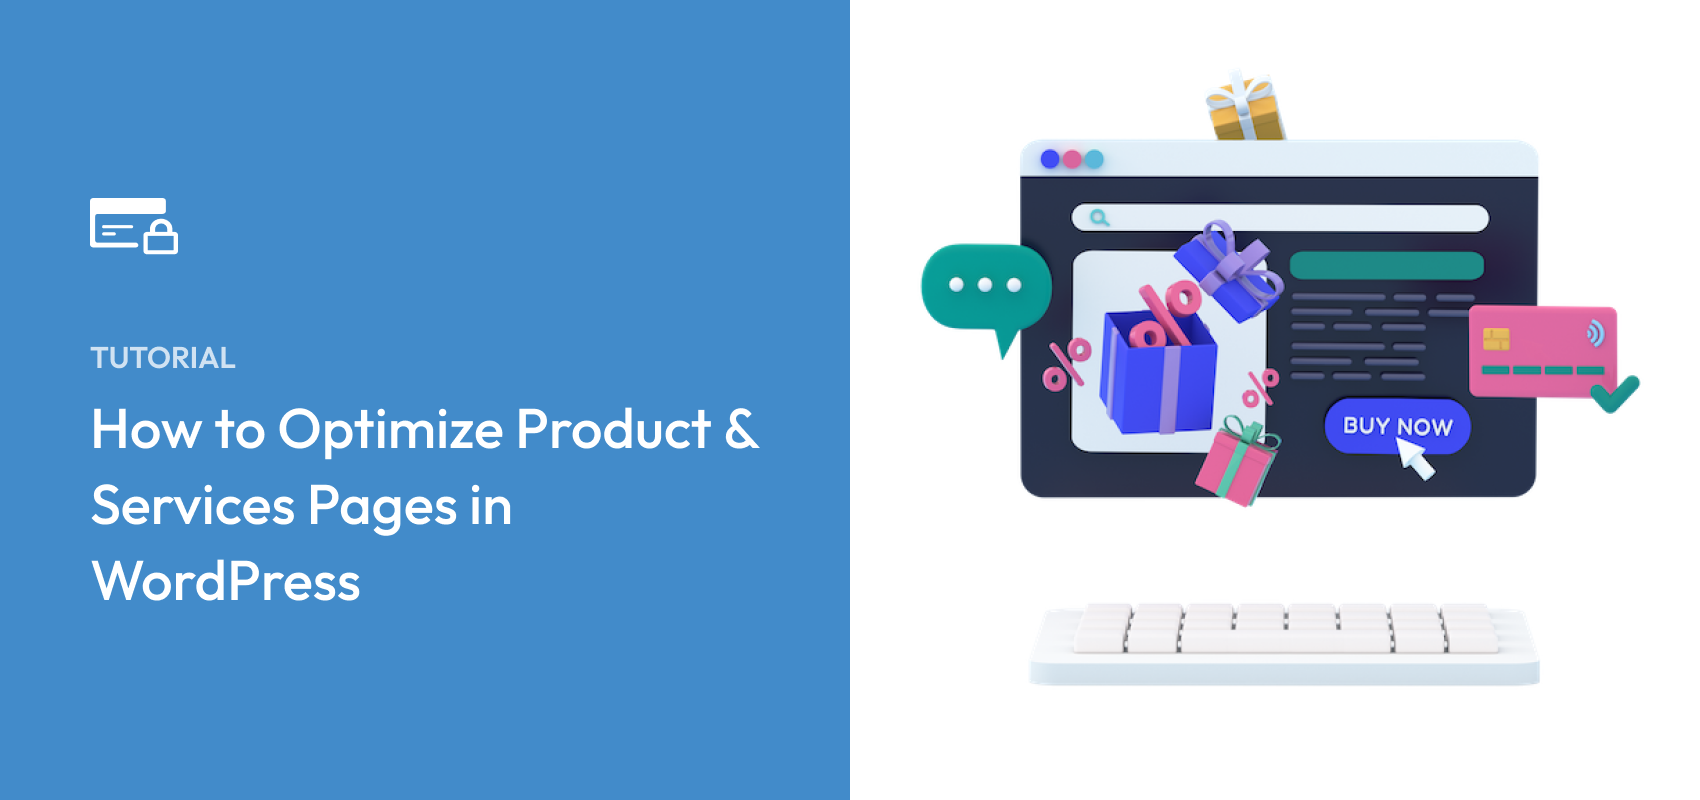 How to Optimize Product & Services Pages in WordPress